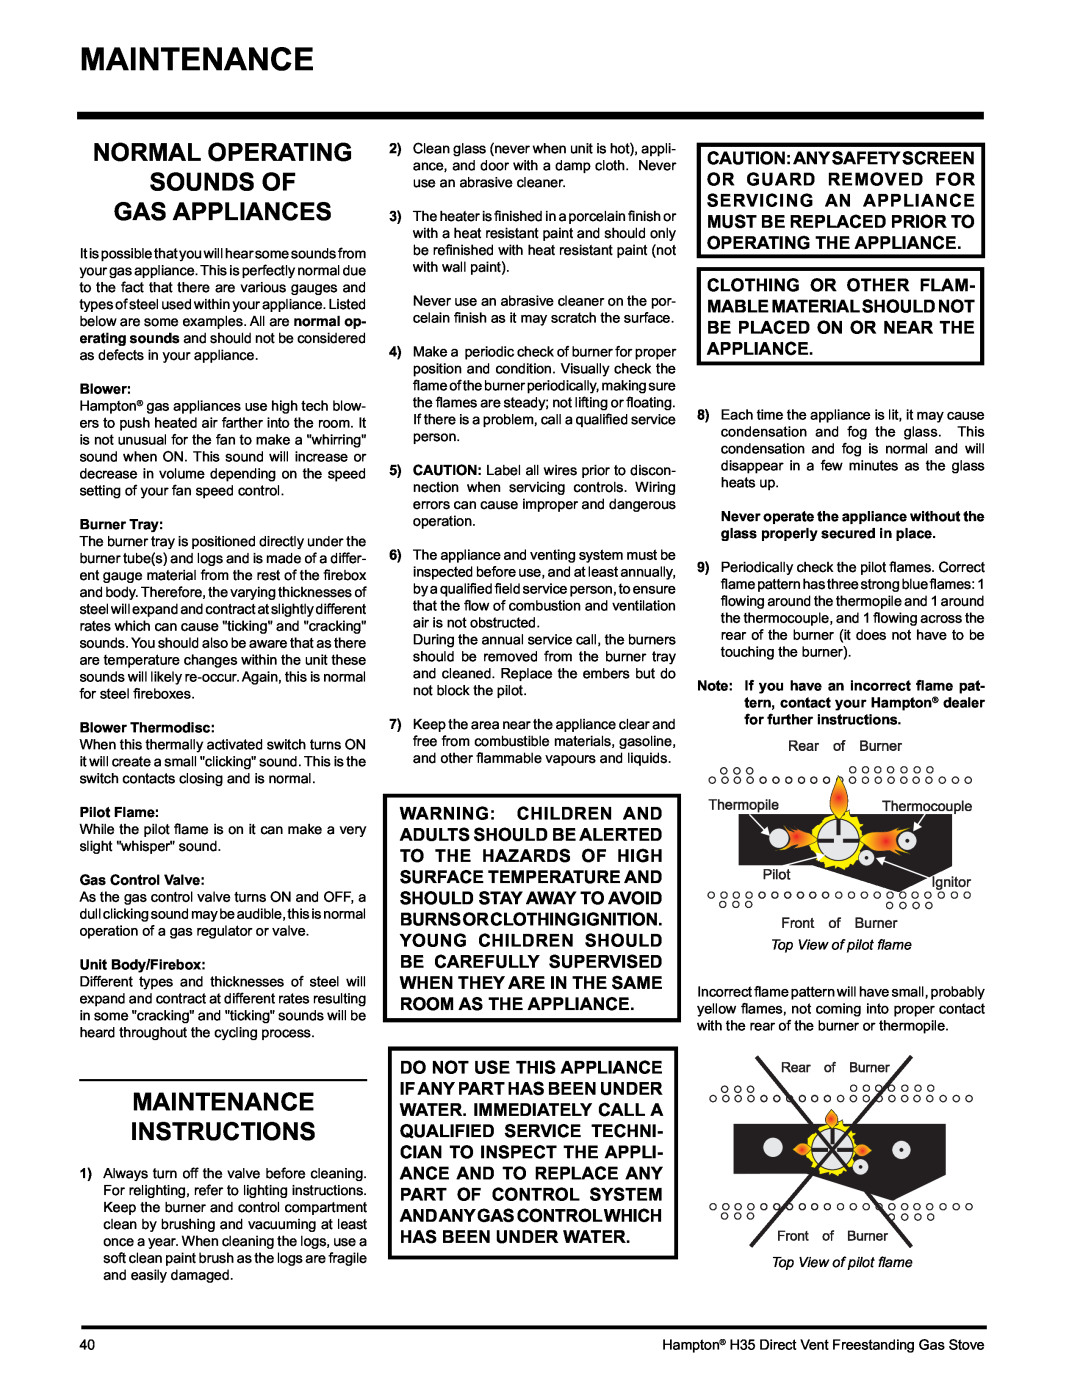 Hampton Direct H35-NG1, H35-LP1 installation manual Normal Operating Sounds Of Gas Appliances, Maintenance Instructions 